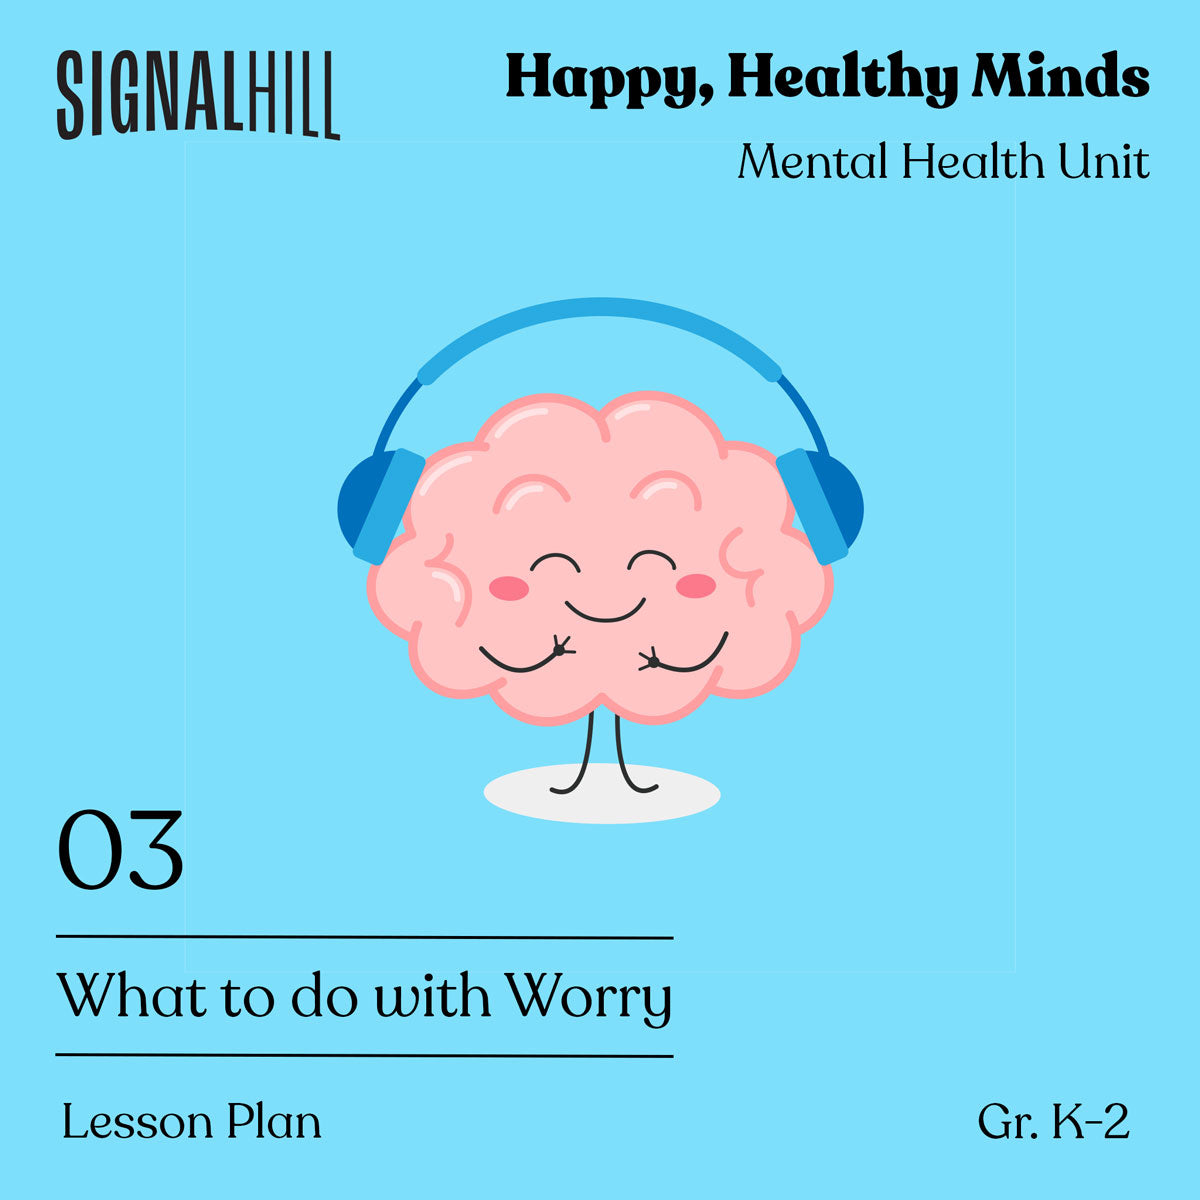 Lesson Plan 3: What to do with Worry